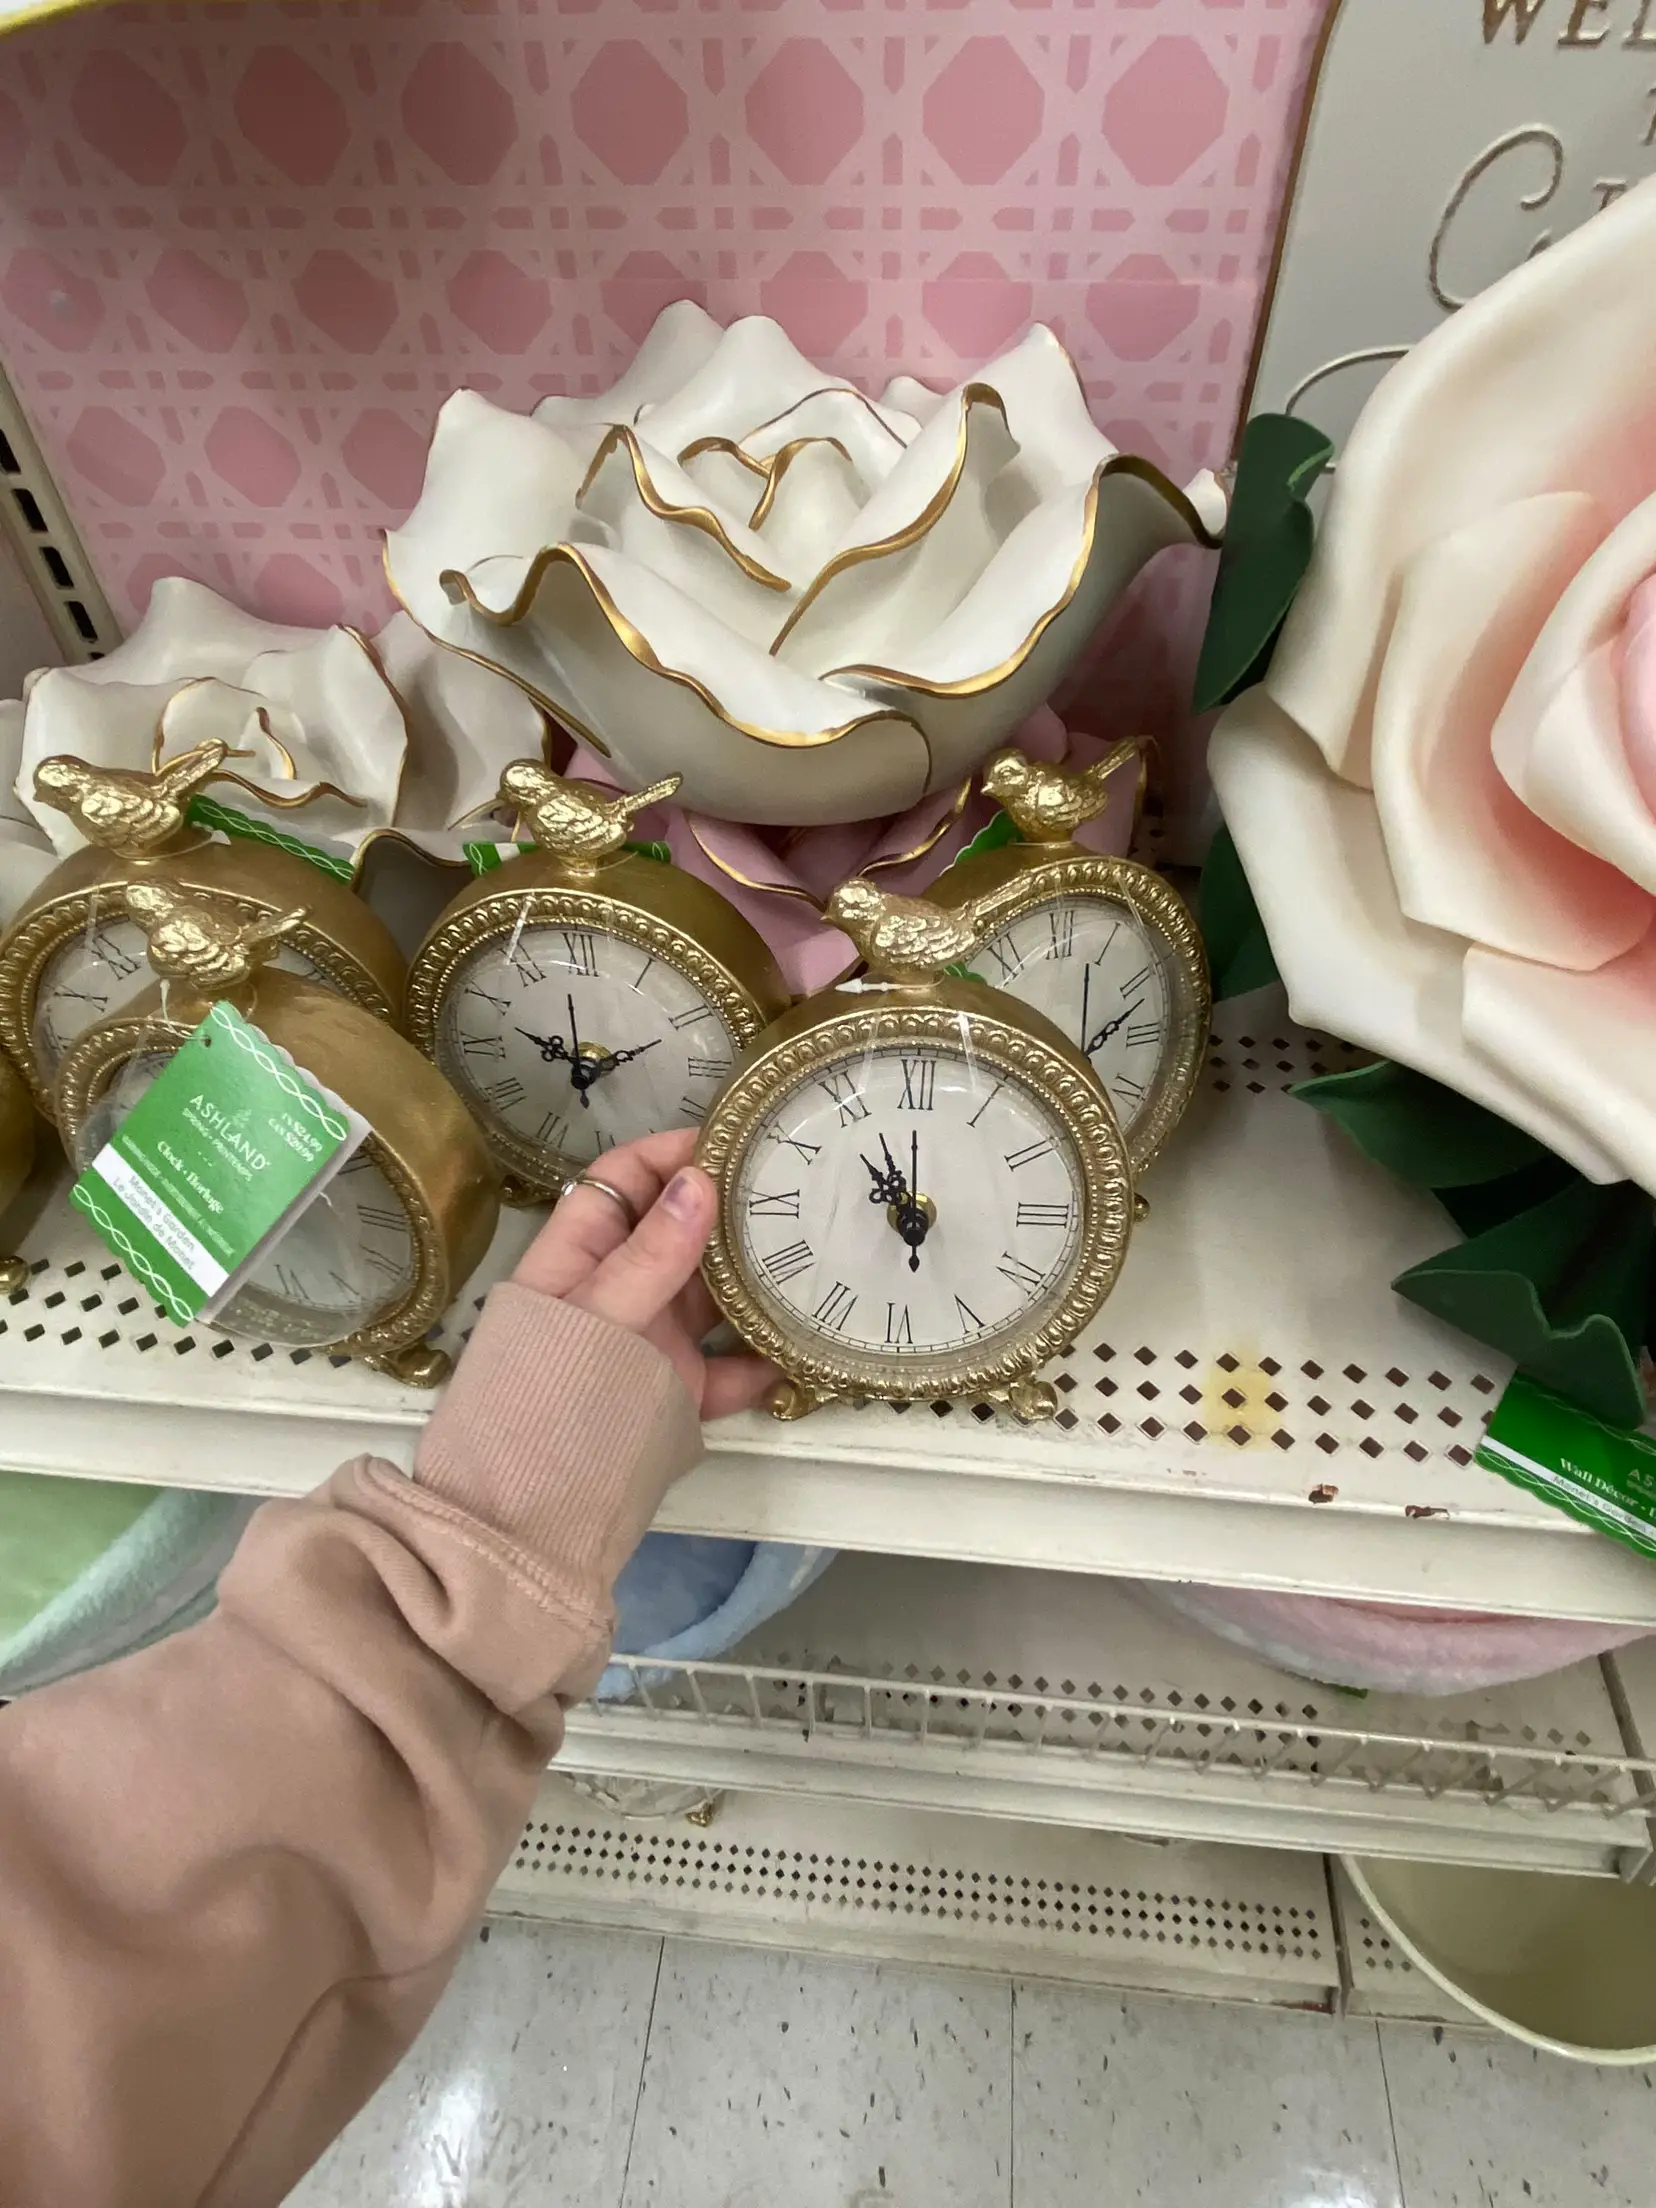  A person is holding a clock in their hand.